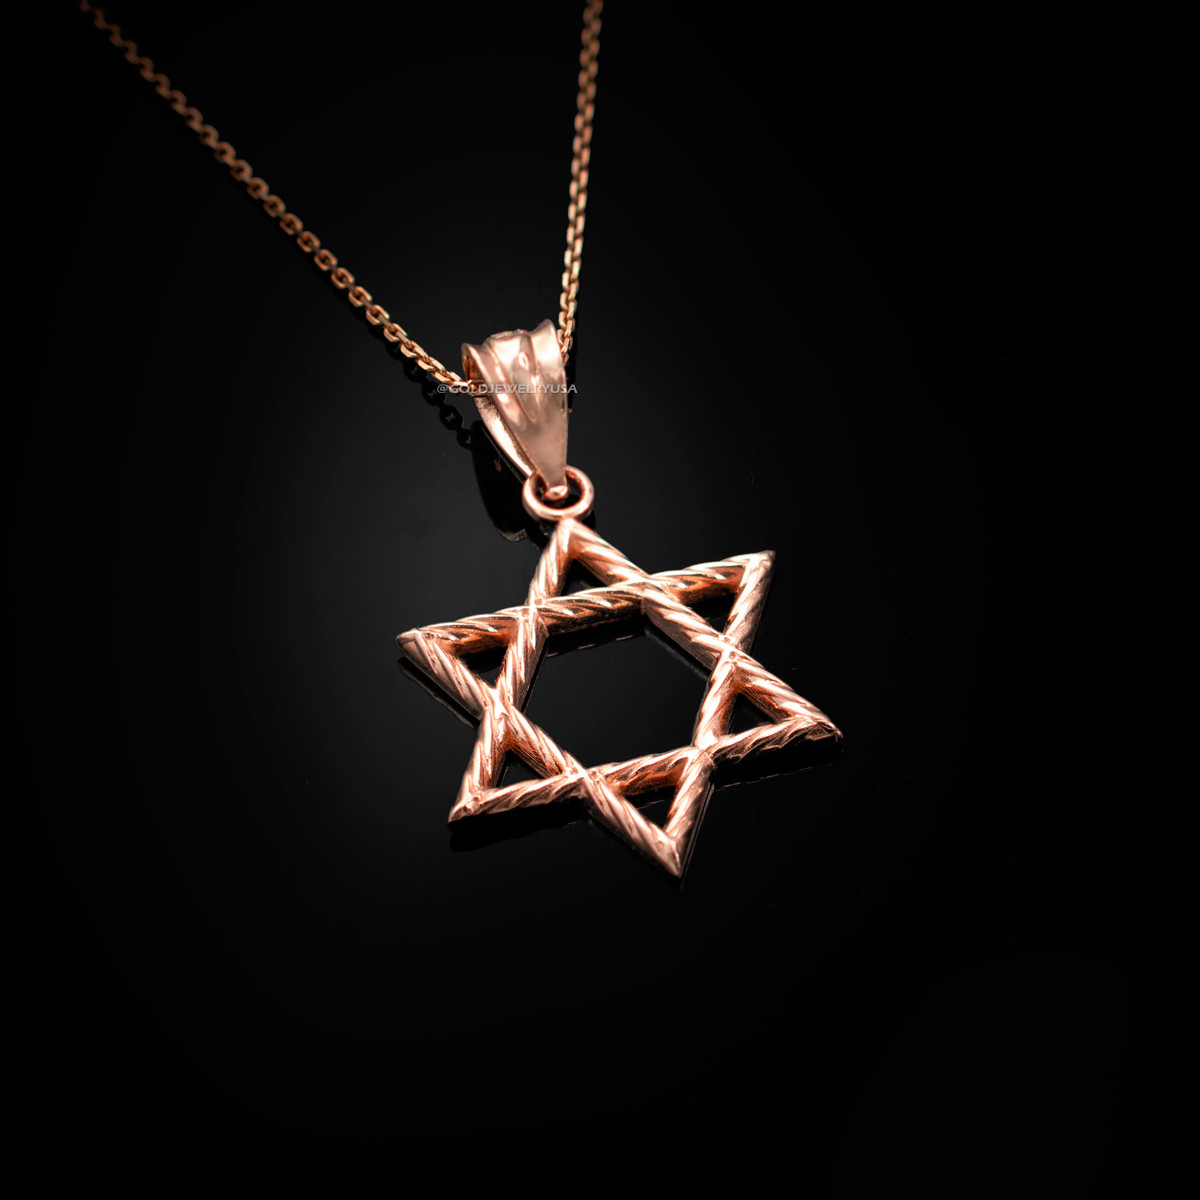 Star of David Necklace, Jewish Star Necklace, Delicate Magen David Necklace,  Gift for Women, Gift for Bat Mitzvah - Etsy | Jewish star necklace, Star  necklace, Necklace